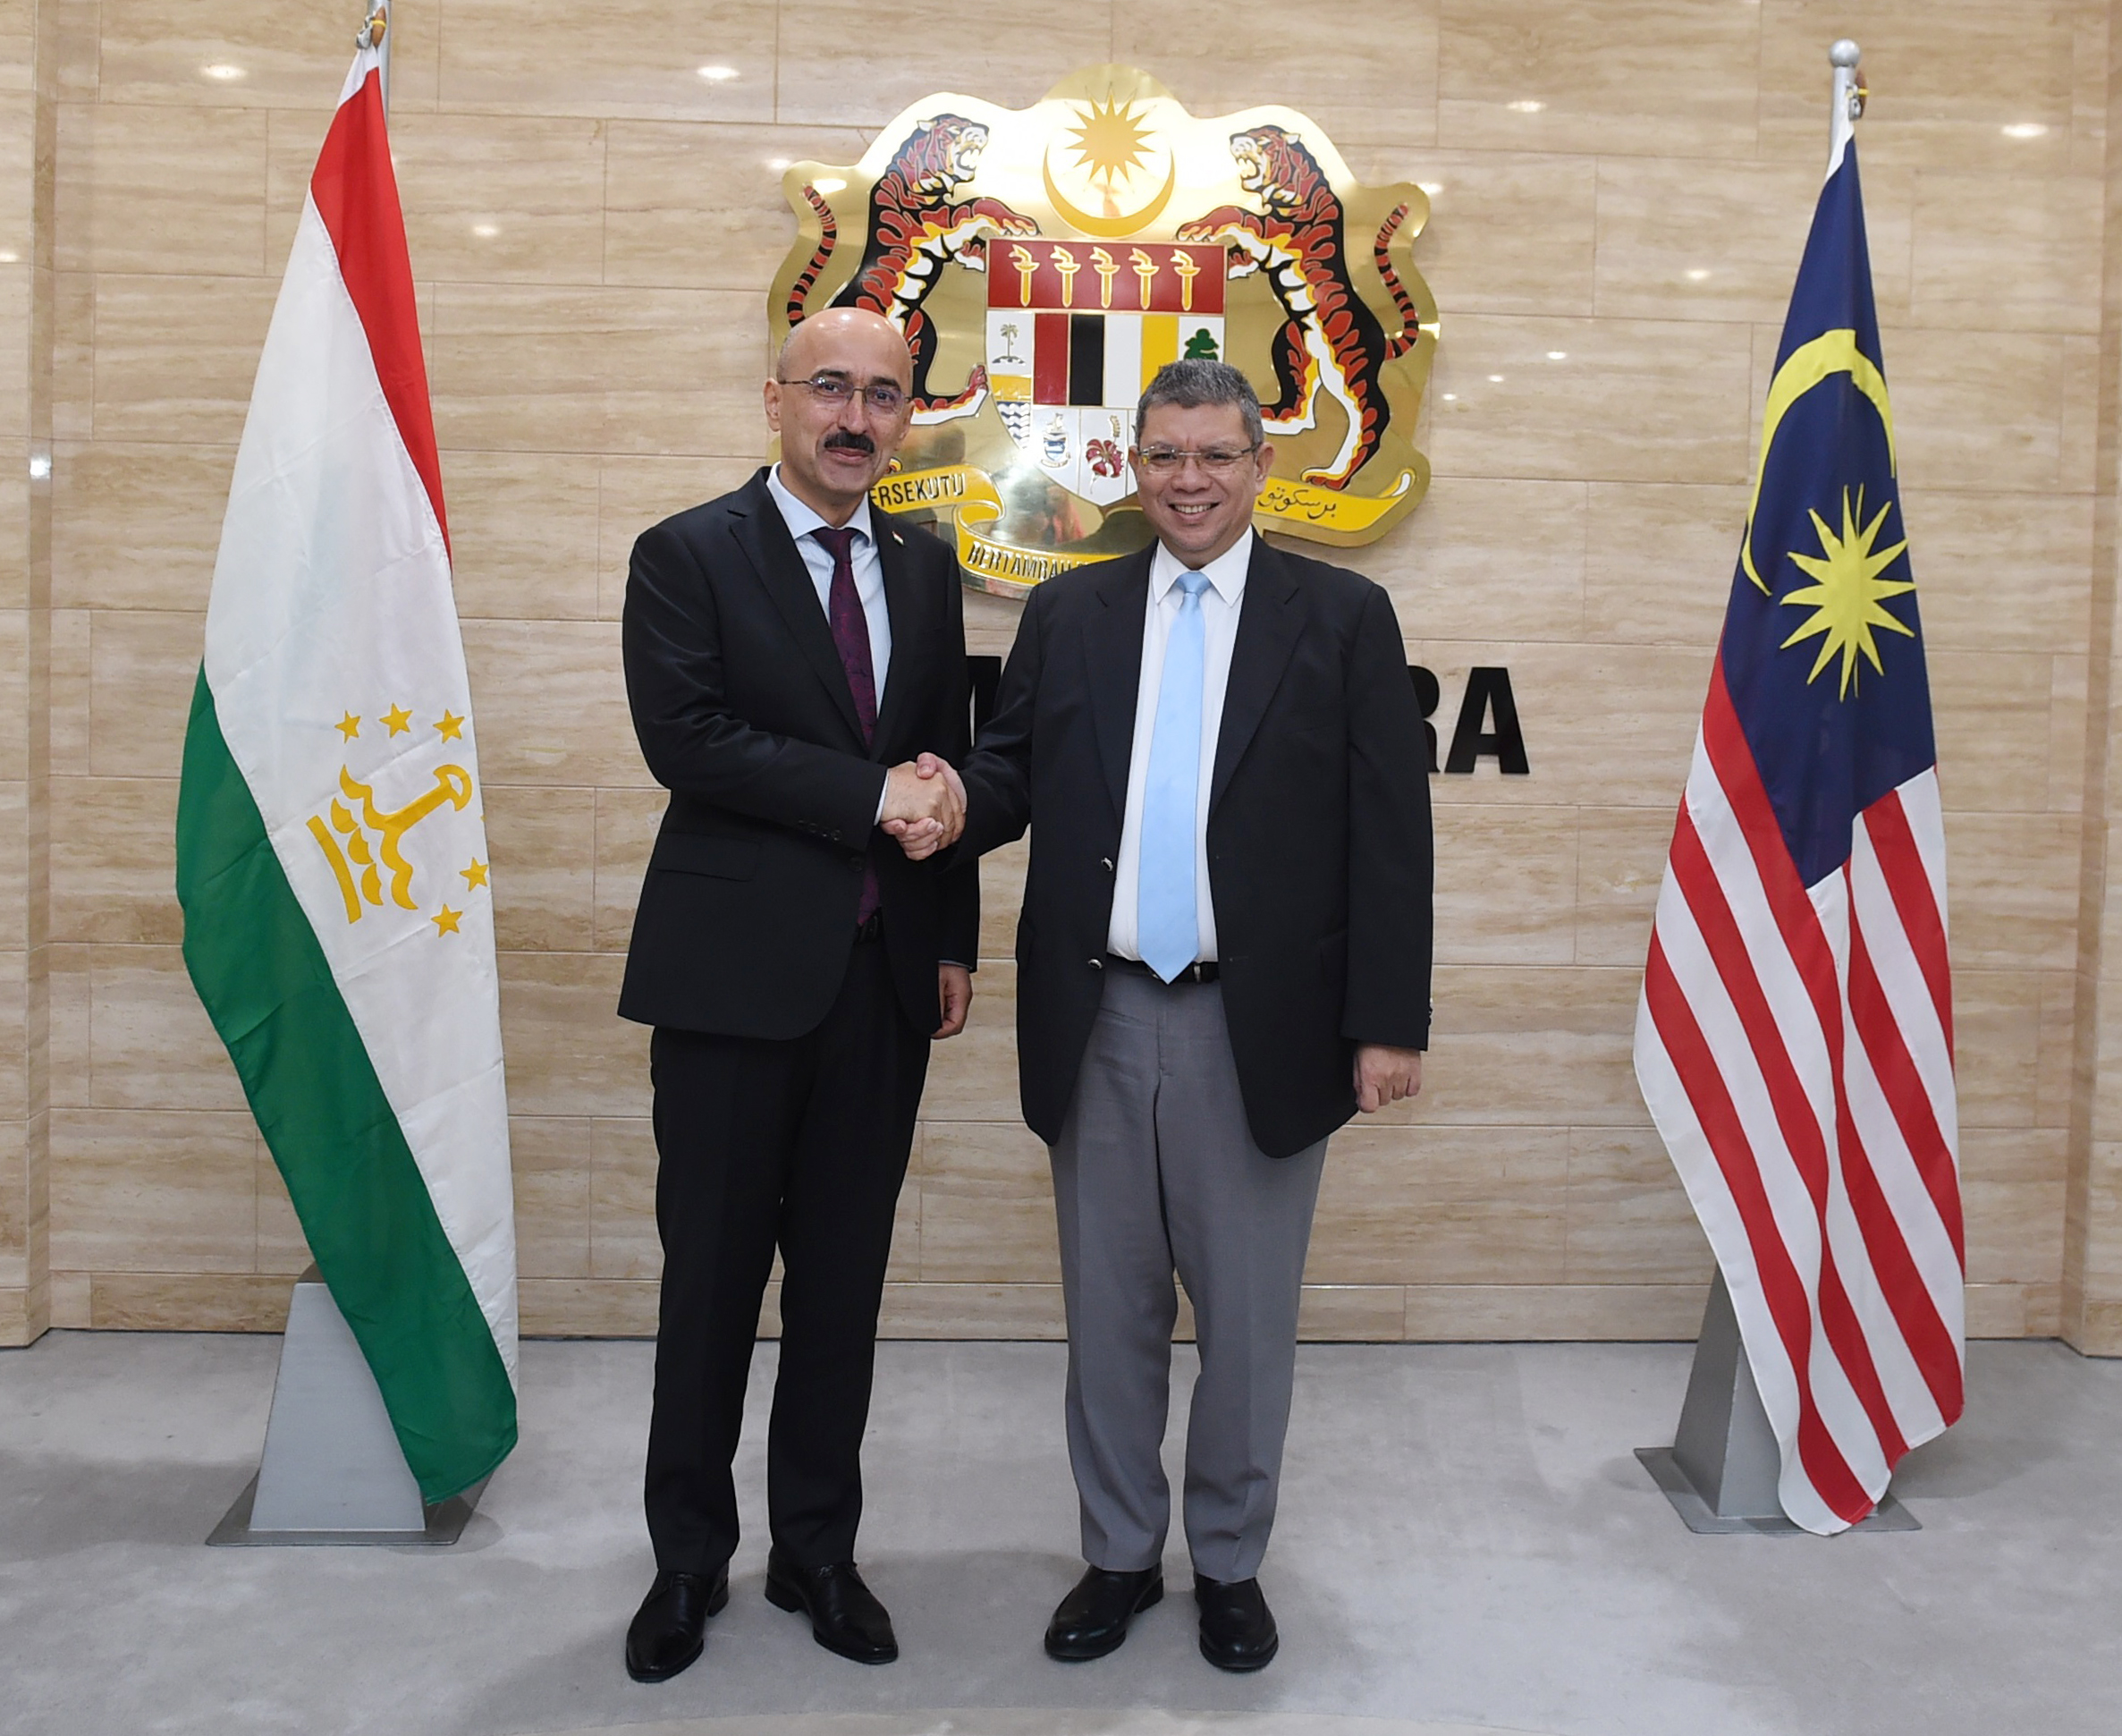 Meeting of the Ambassador of the Republic of Tajikistan with the Minister of Foreign Affairs of Malaysia